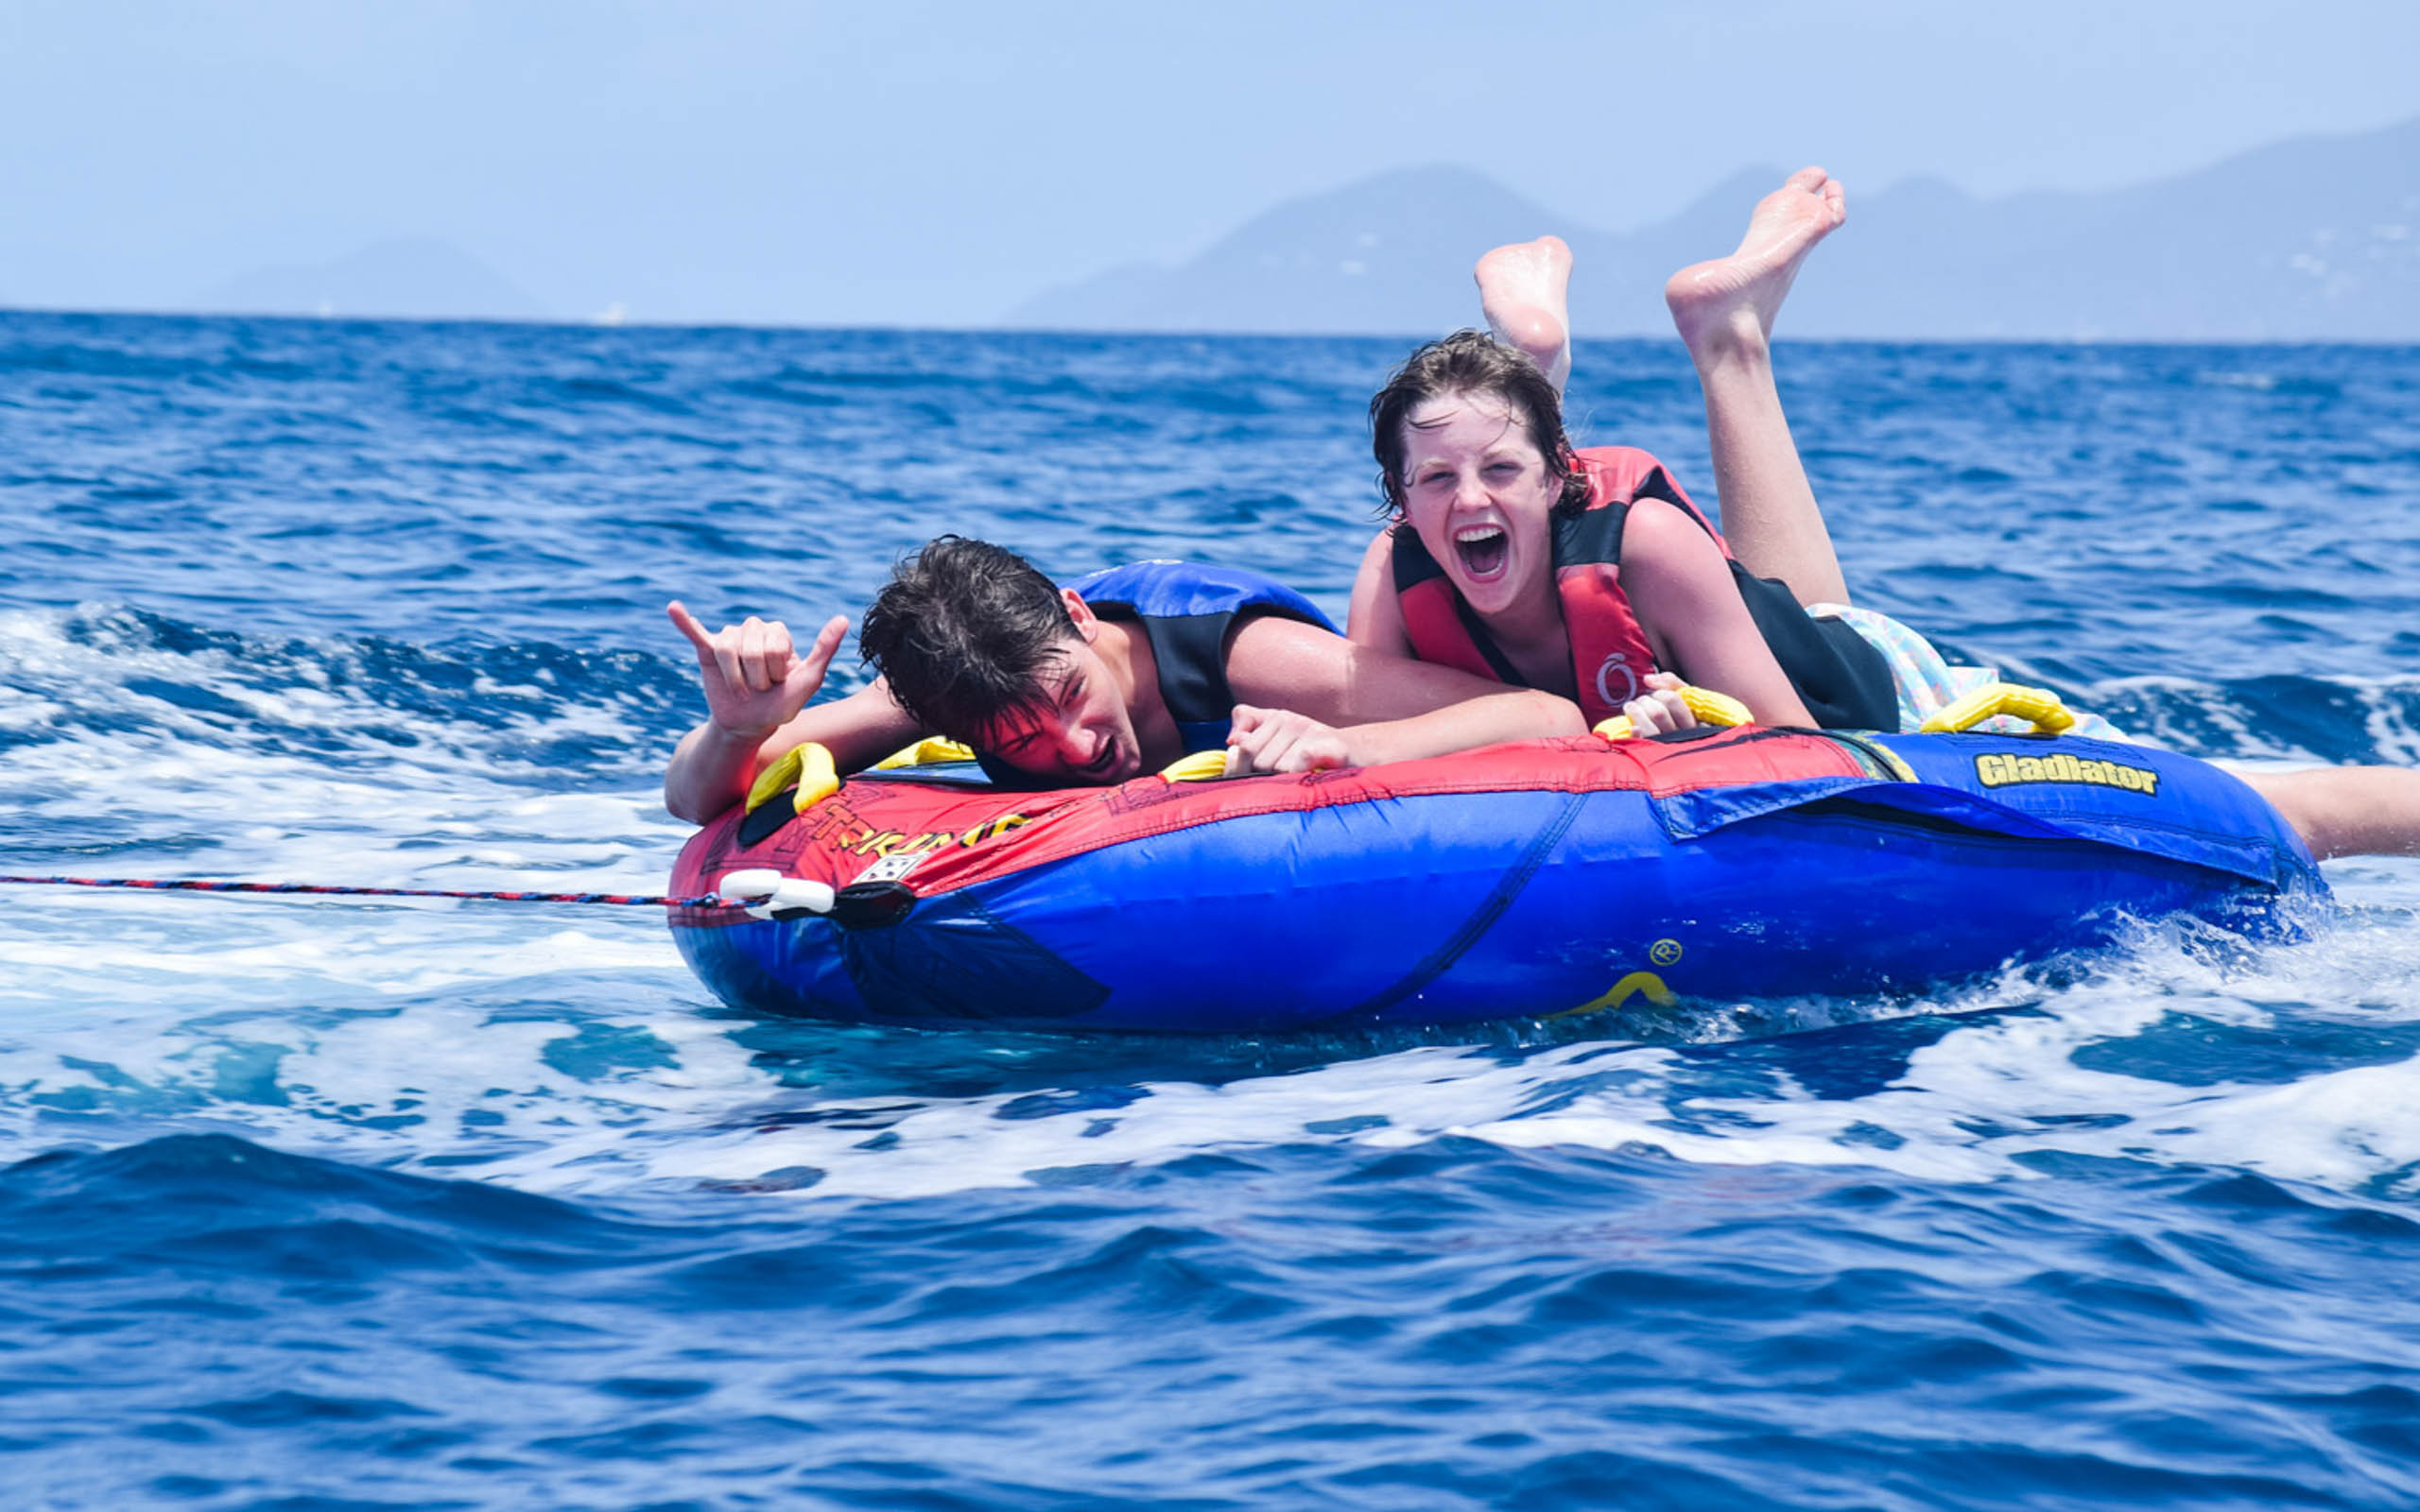 Two people riding on an inflatable tube in the ocean.